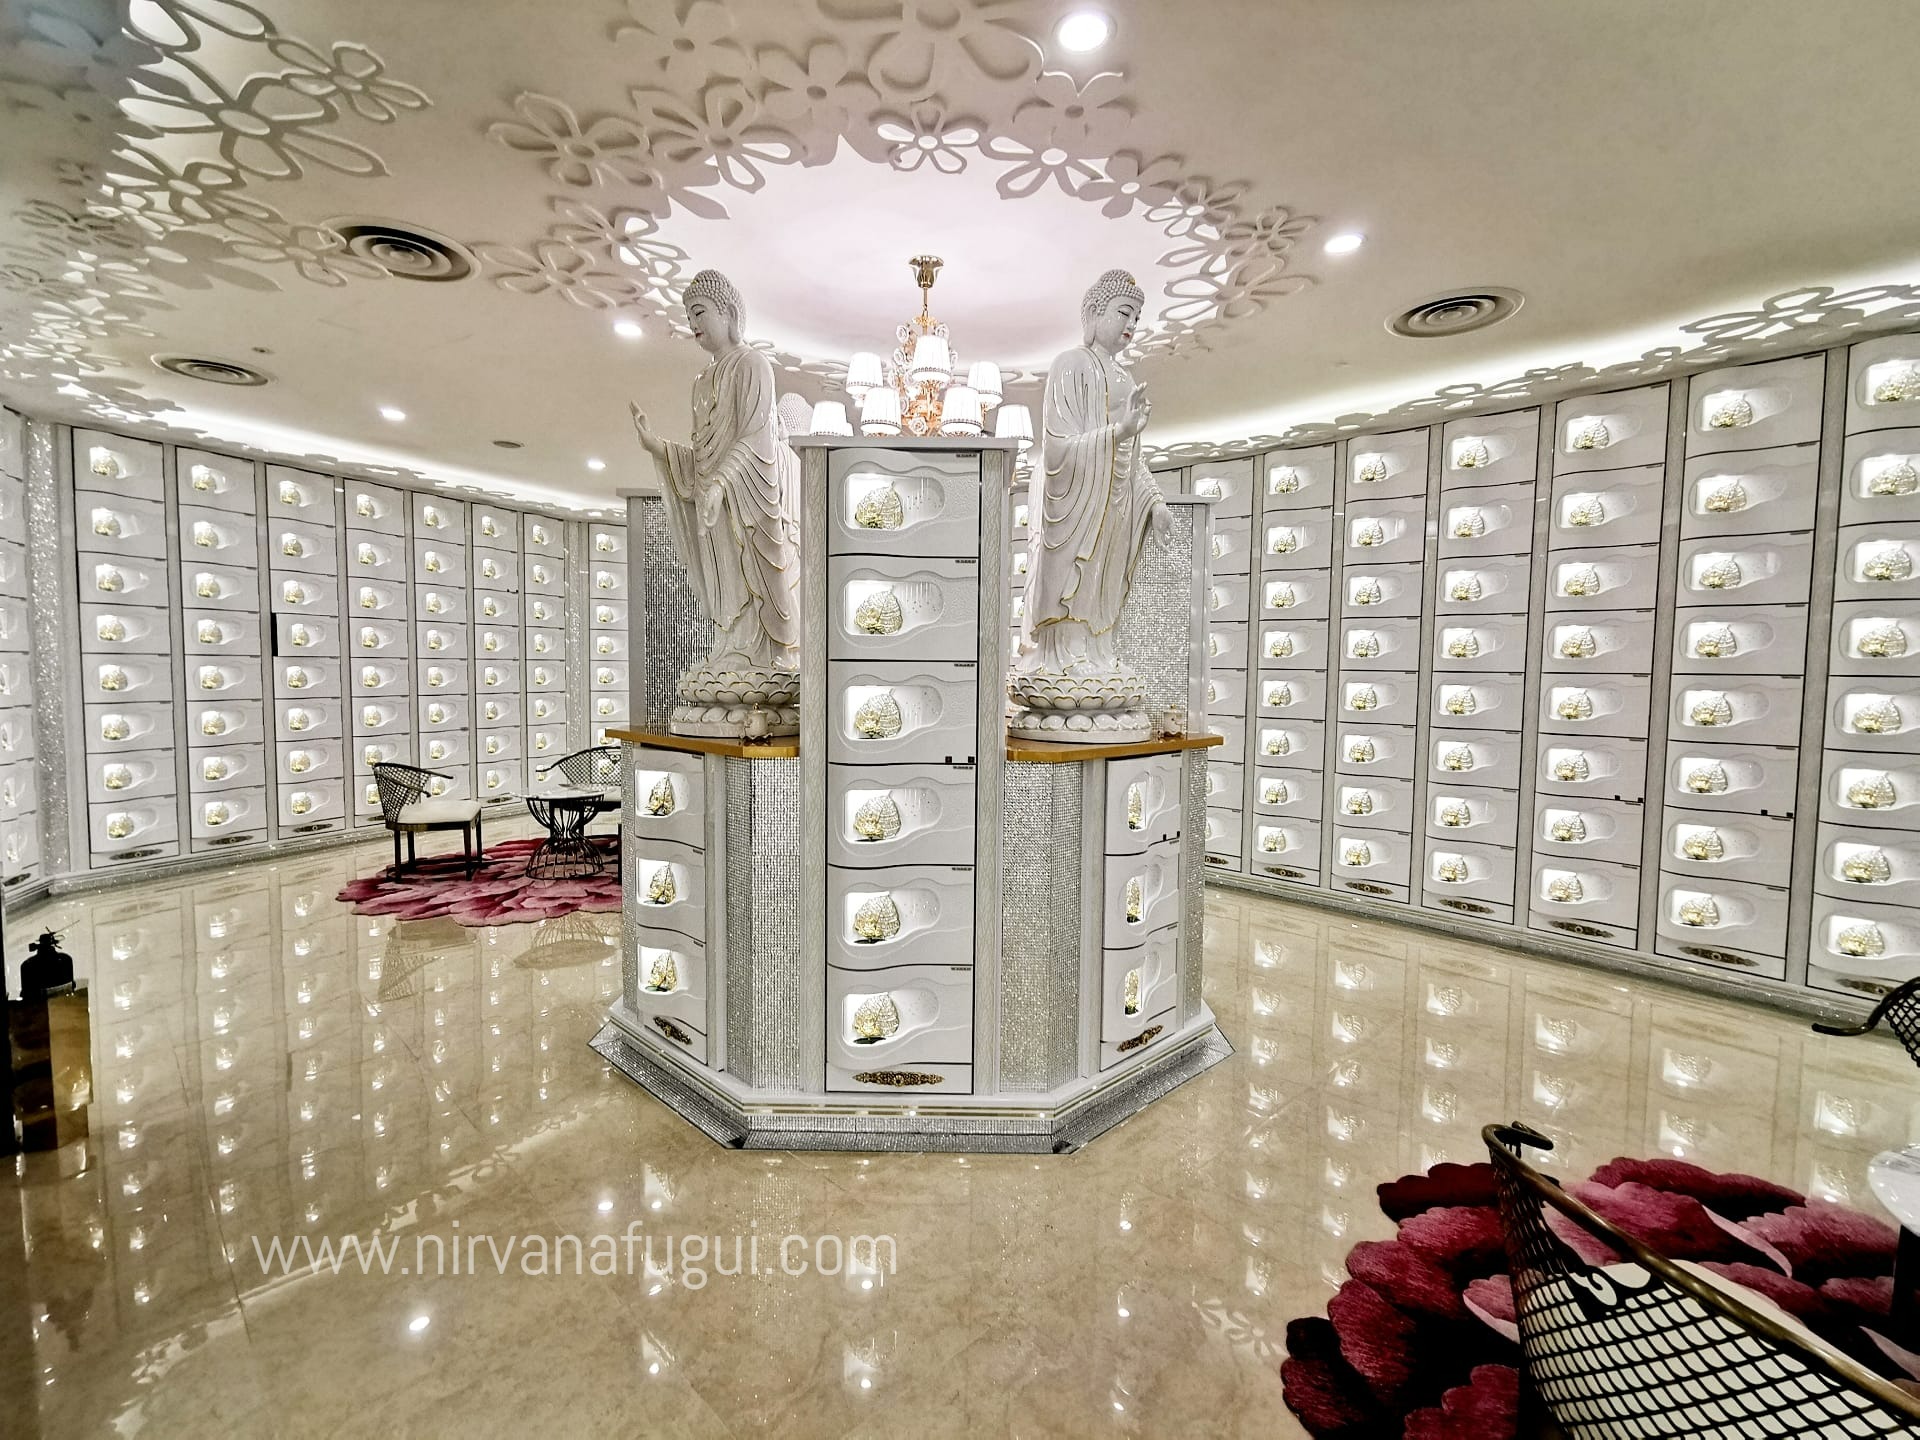 You are currently viewing 6 Choices of Columbarium Design in Nirvana Singapore